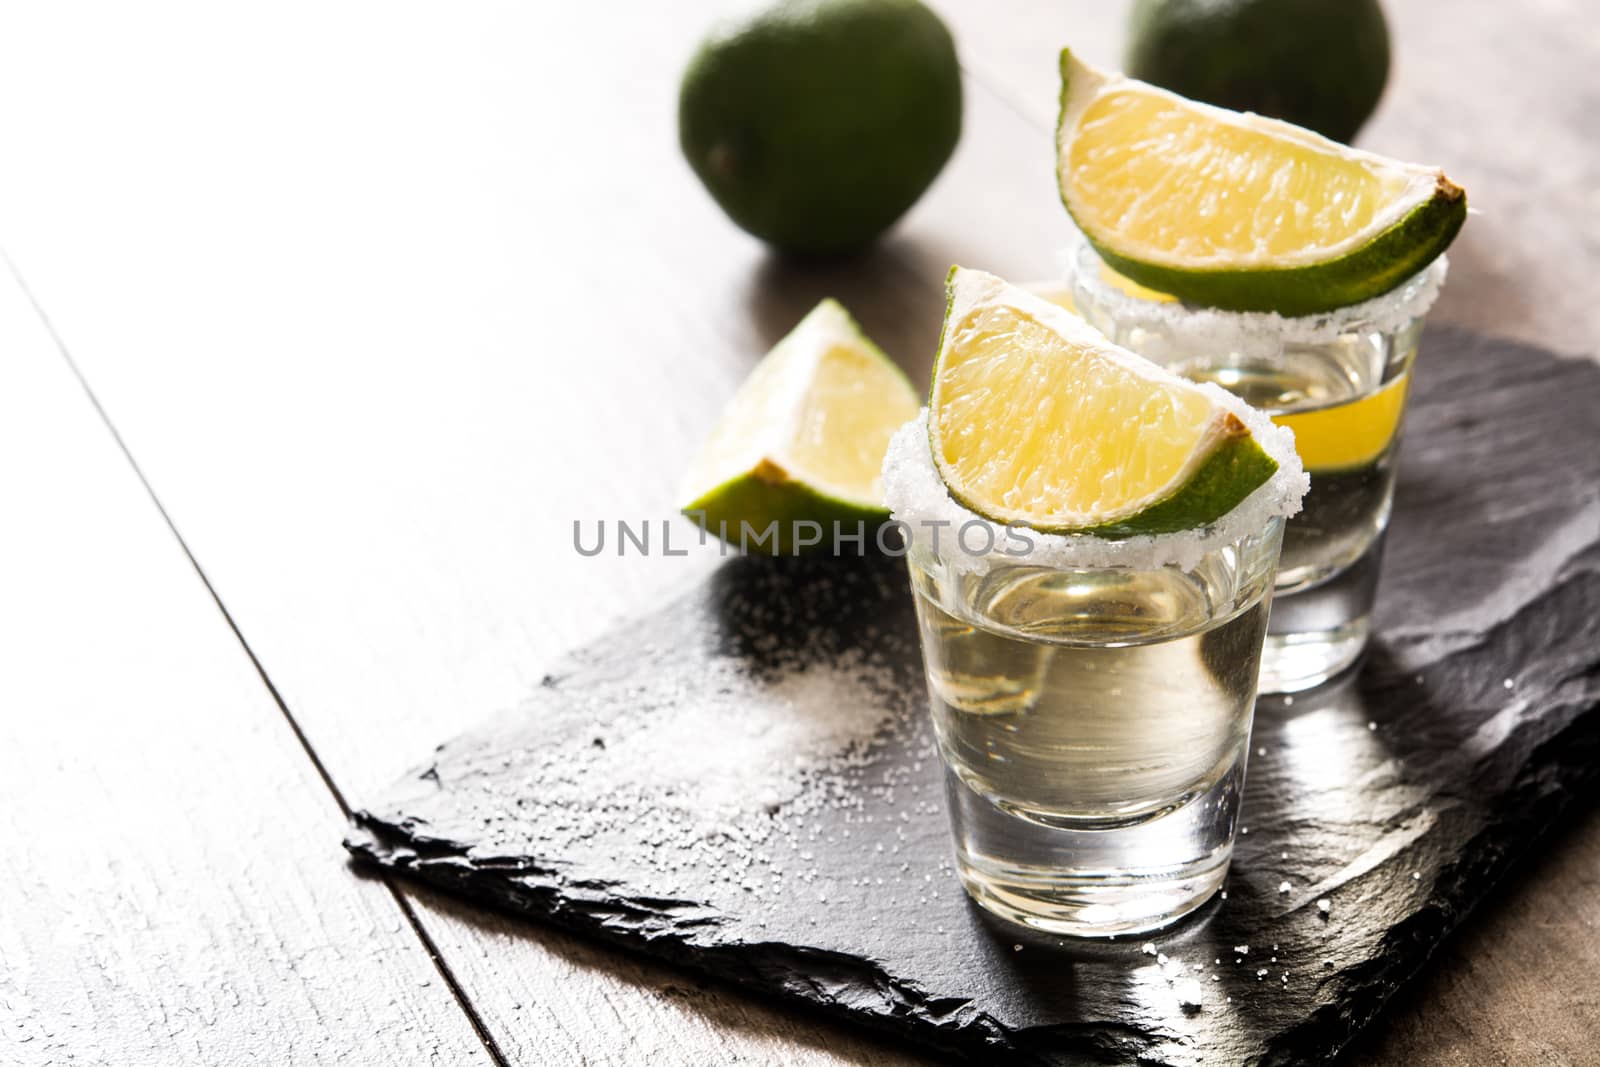 Mexican Gold tequila with lime and salt on wooden table.